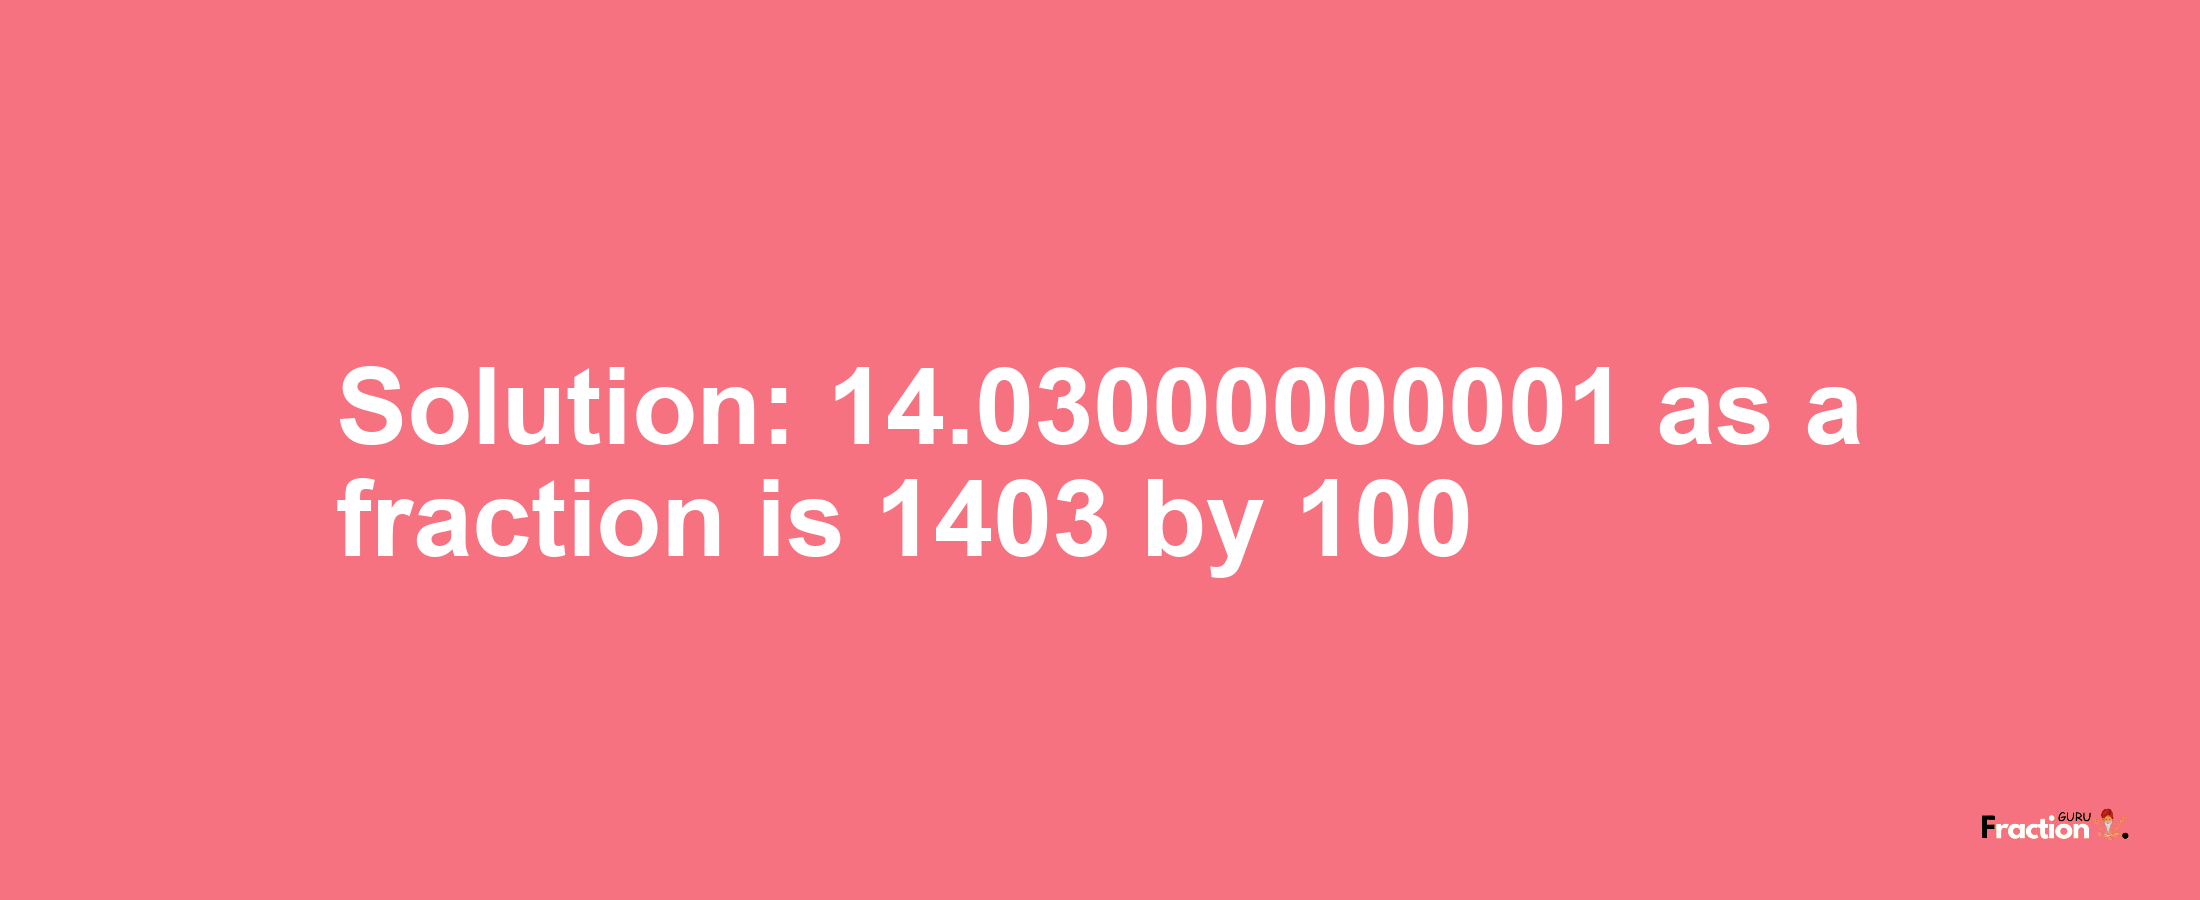 Solution:14.03000000001 as a fraction is 1403/100